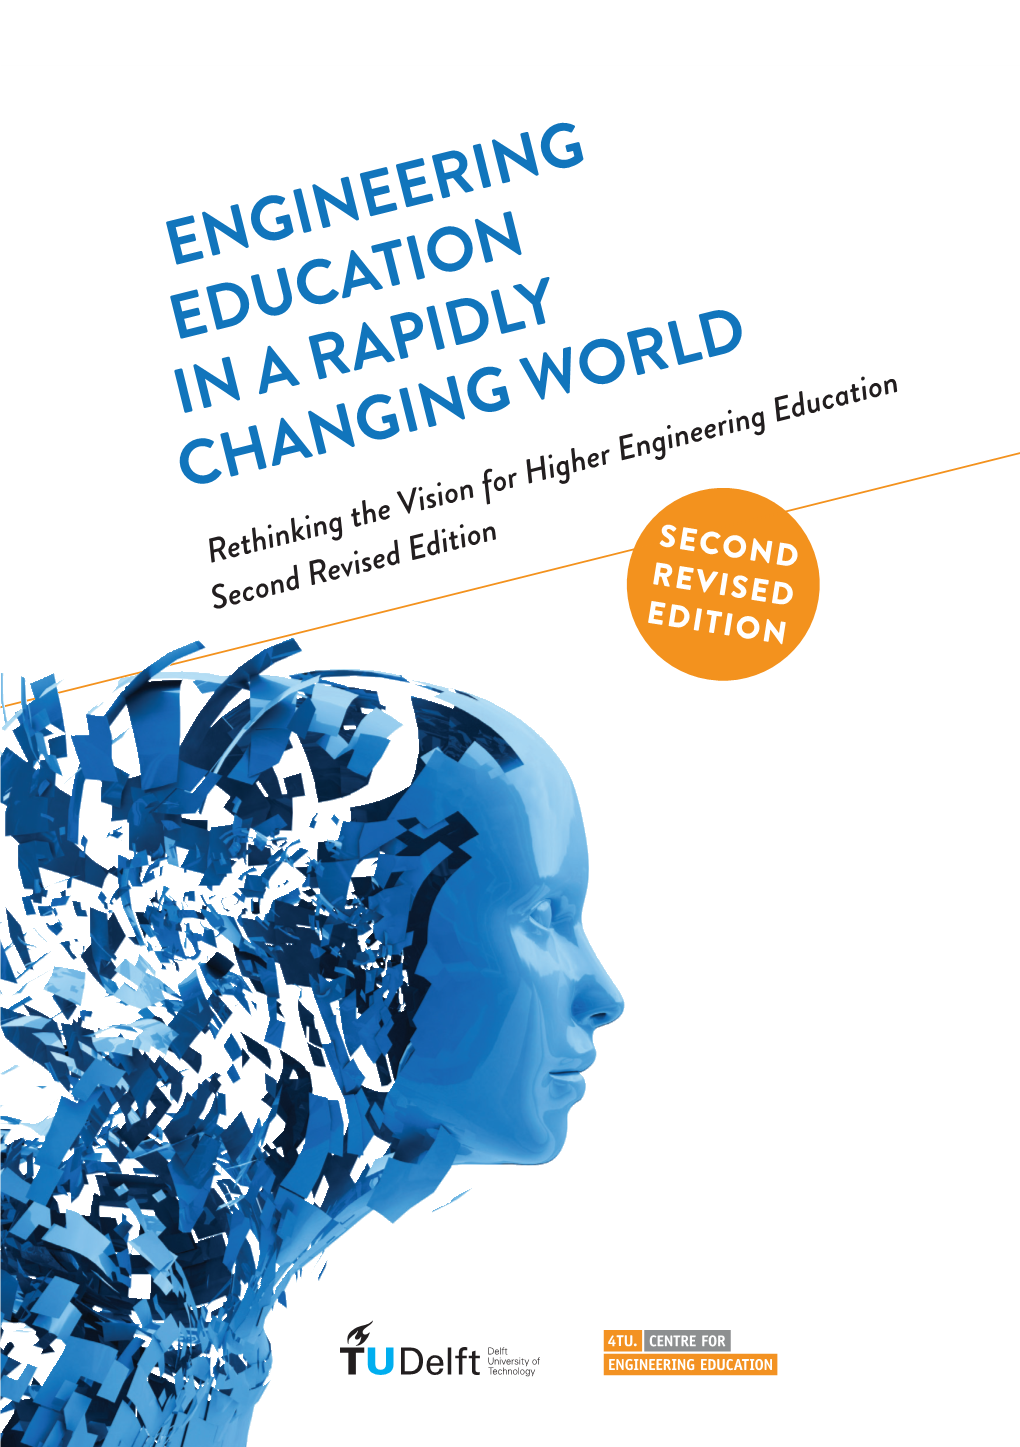 Engineering Education in a Rapidly Changing World